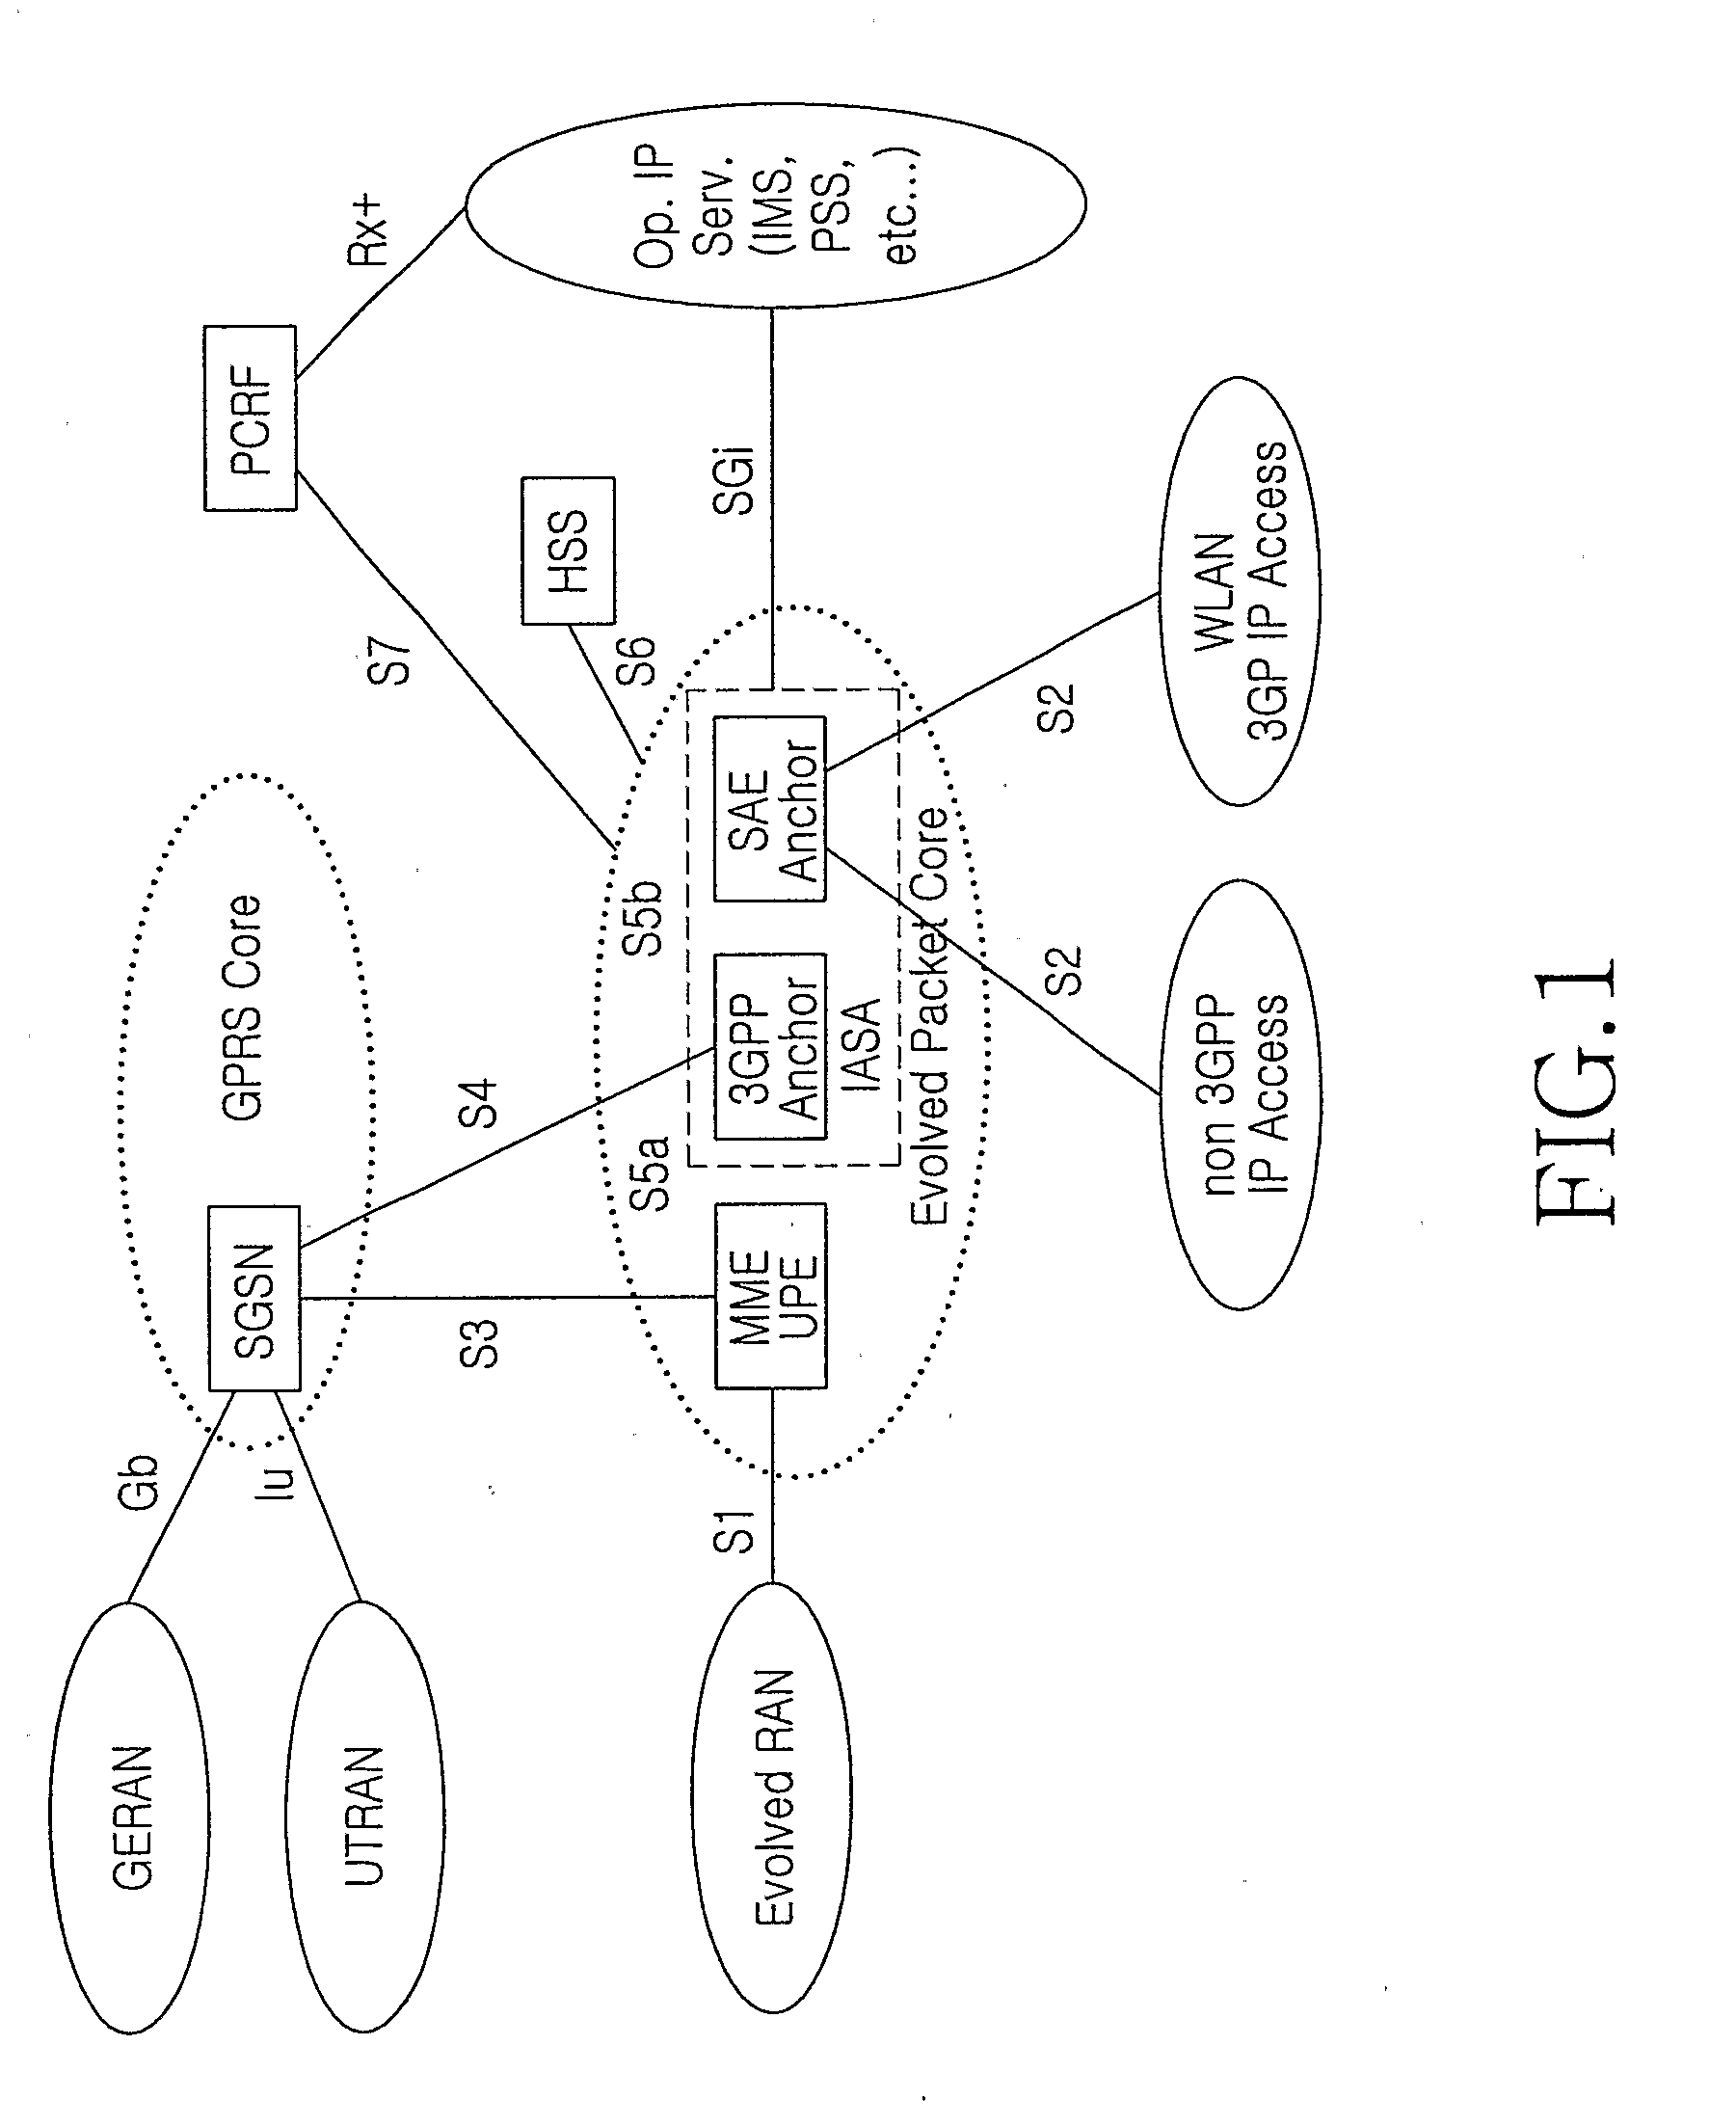 System and method of providing user equipment initiated and assisted backward handover in heterogeneous wireless networks